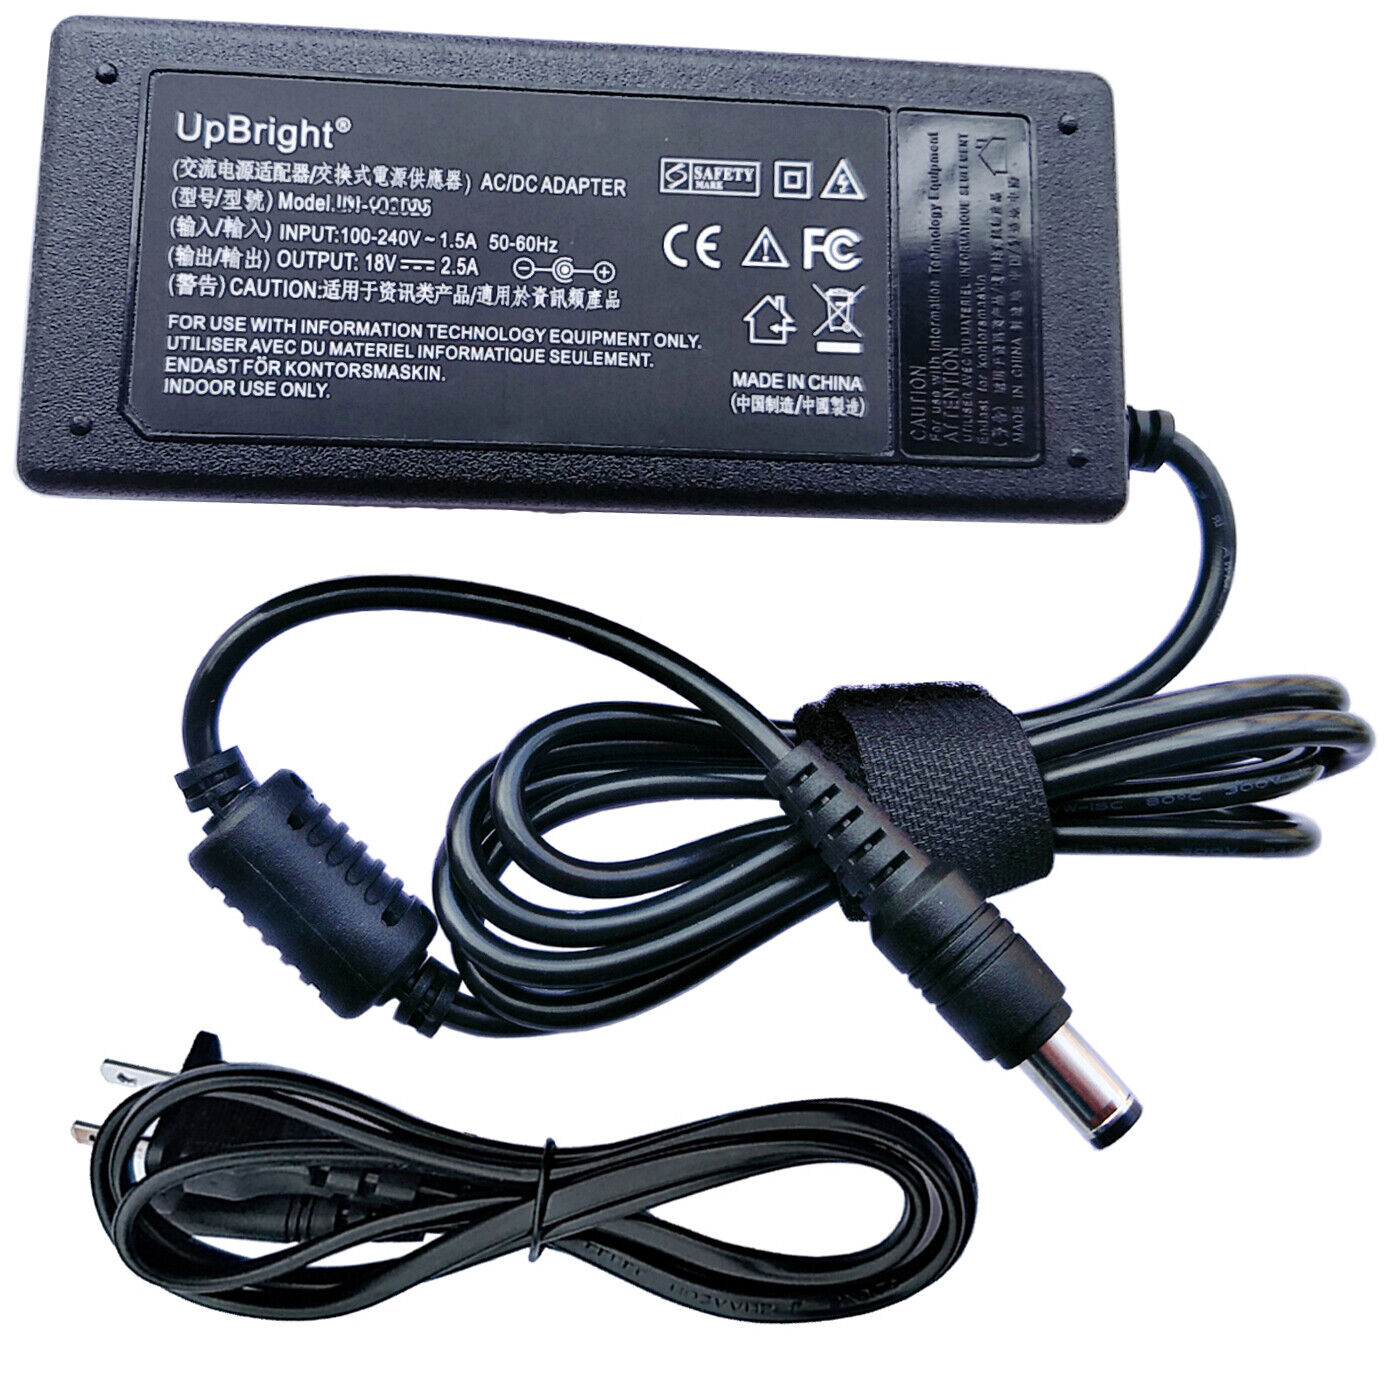 18V 2.5A AC DC Adapter For Ktec KSAS0451800250M2 Cricut Power Supply Charge...